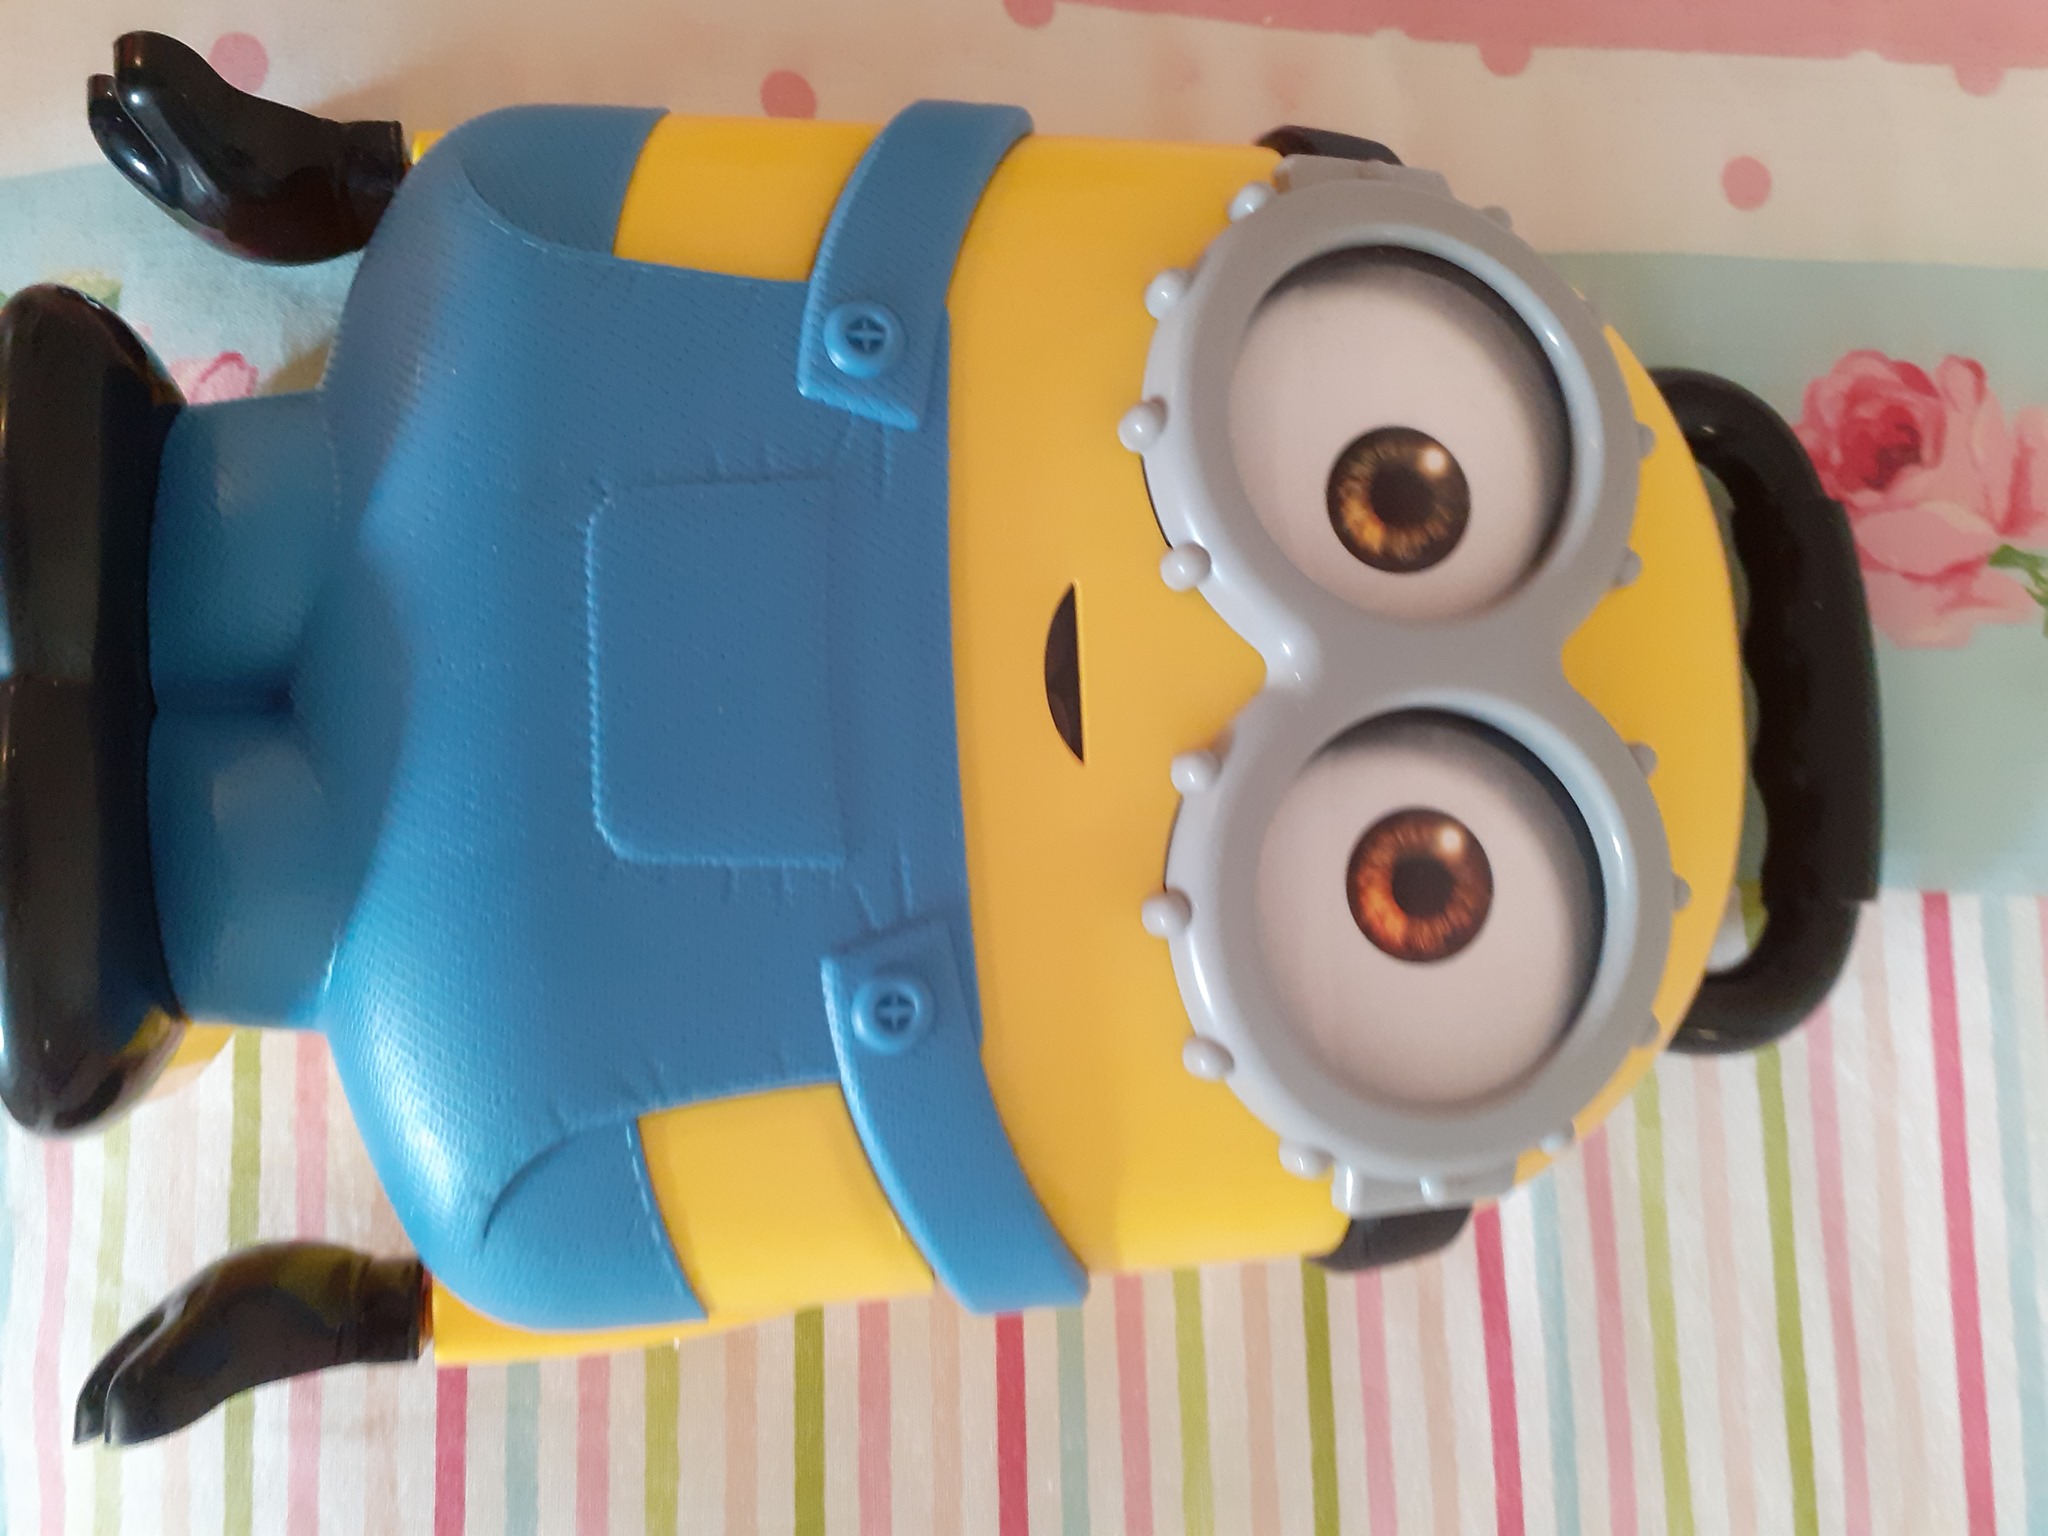  Minions carry case comes with catcher banana and teddy